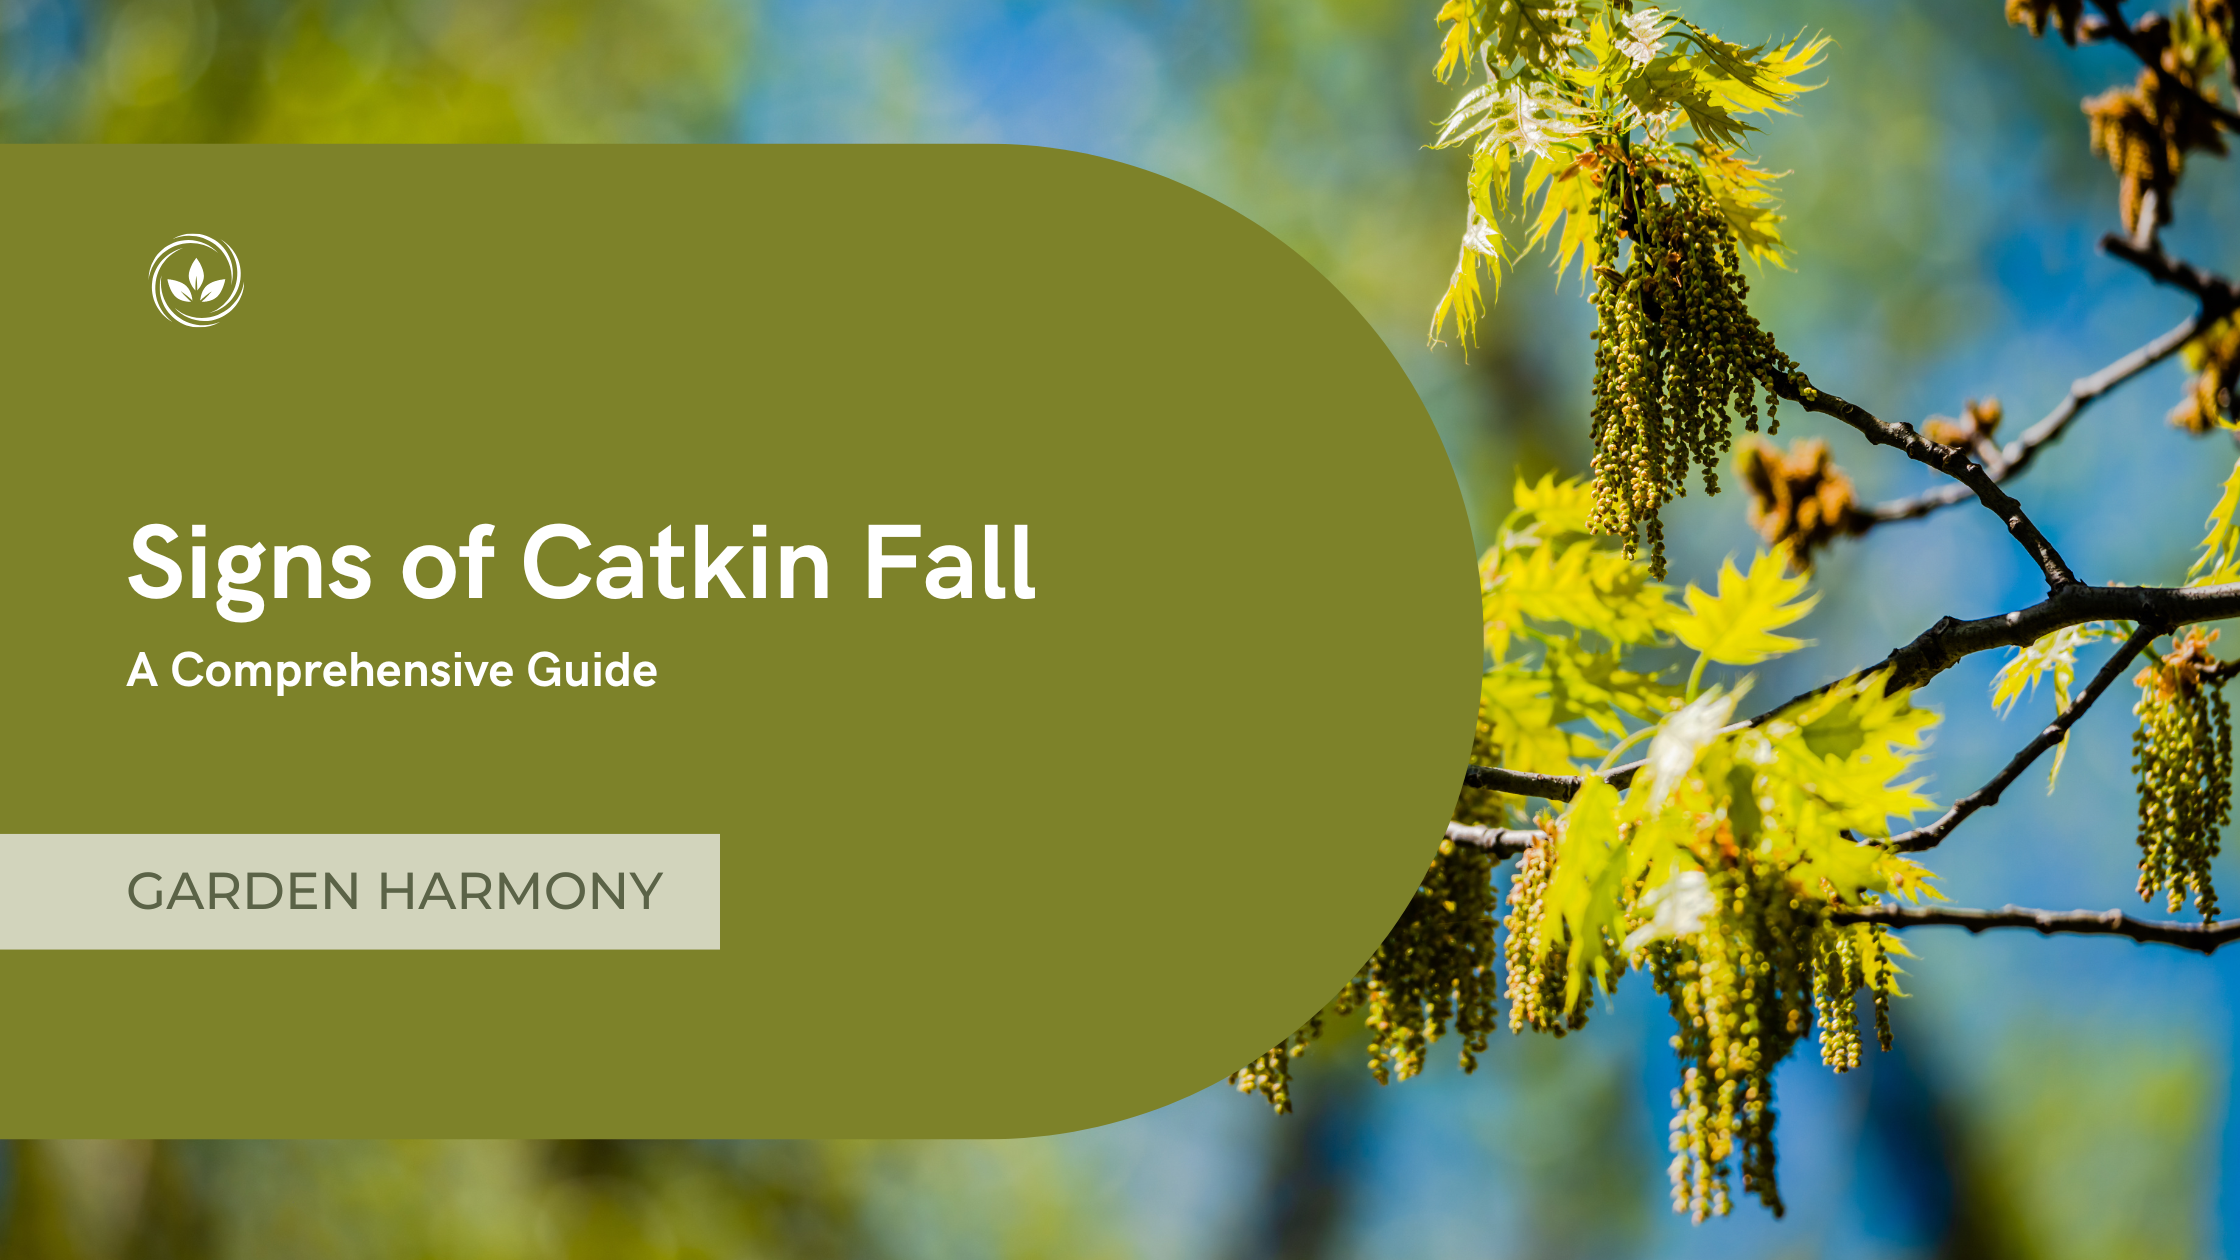 Signs of Catkin Fall